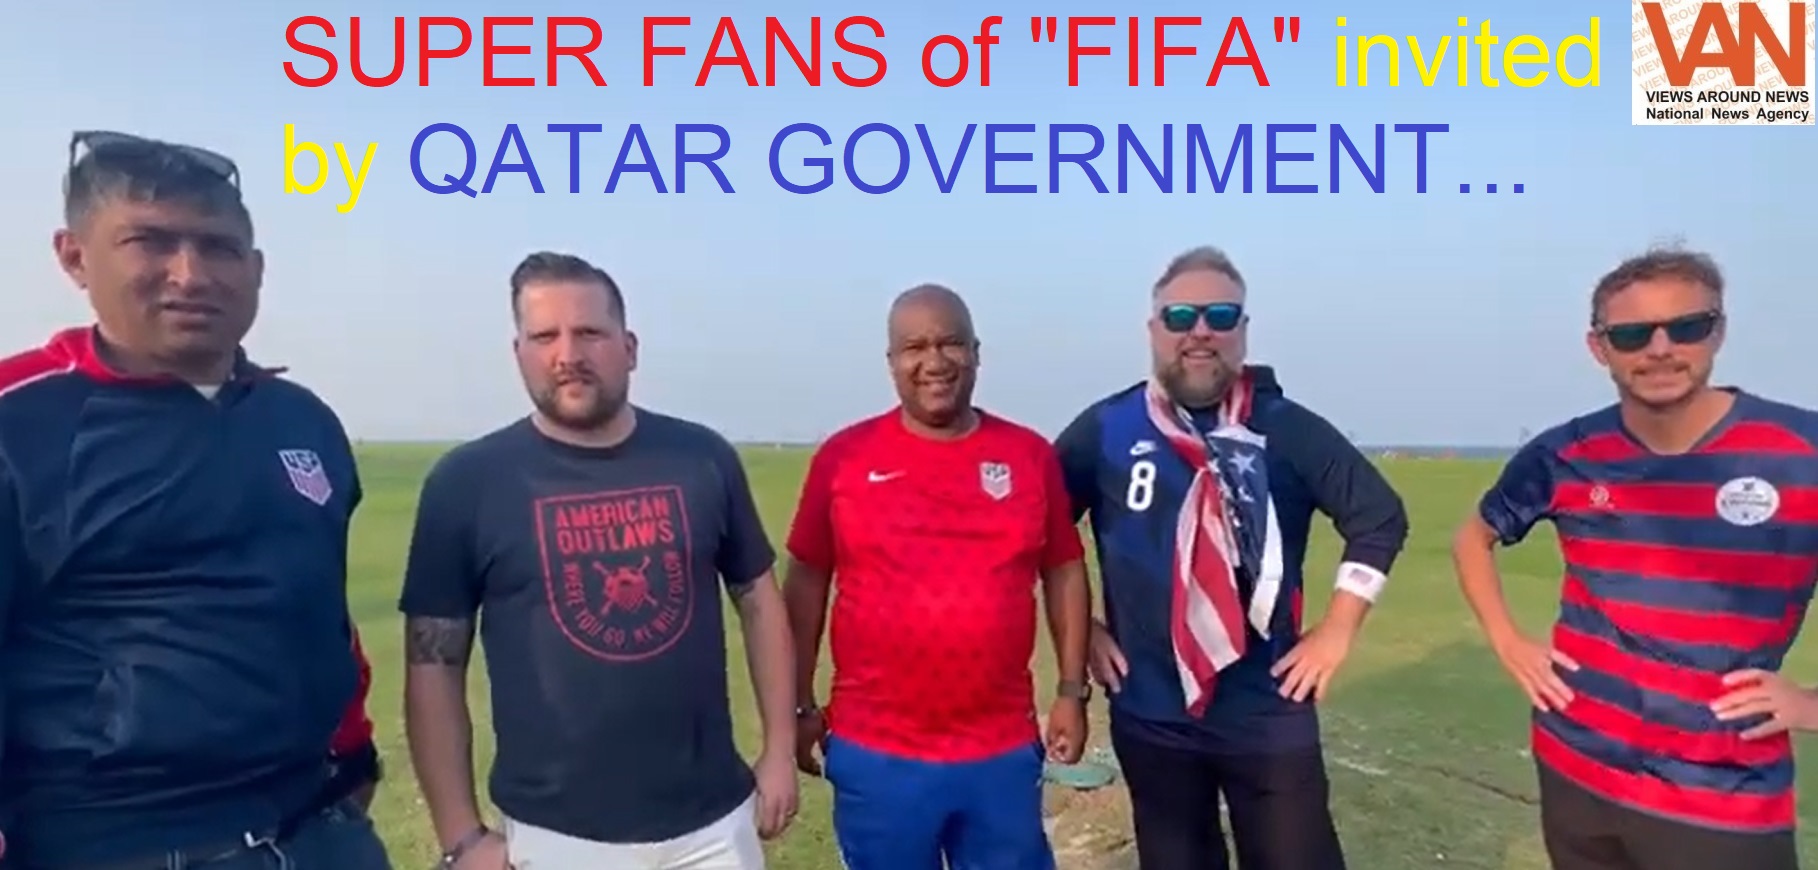 Super FANS of Football at FIFA World Cup 2022